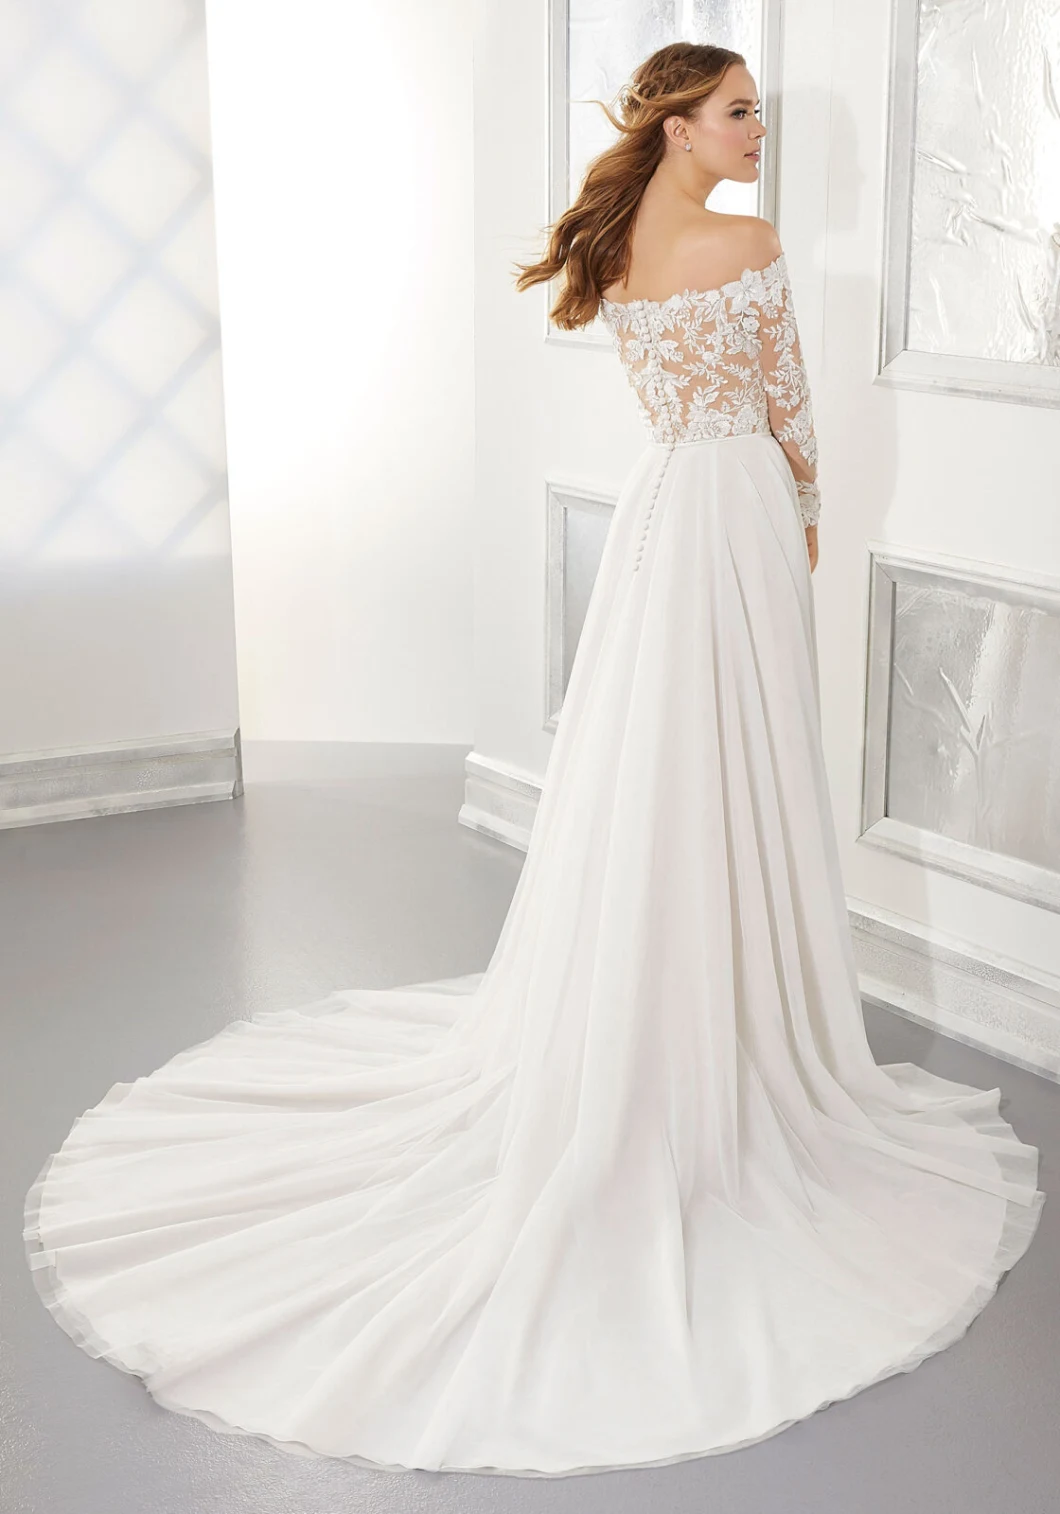 English Net and Lace Has Long Sleeves Wedding Dresses off The Shoulder A-Line Wedding Dress